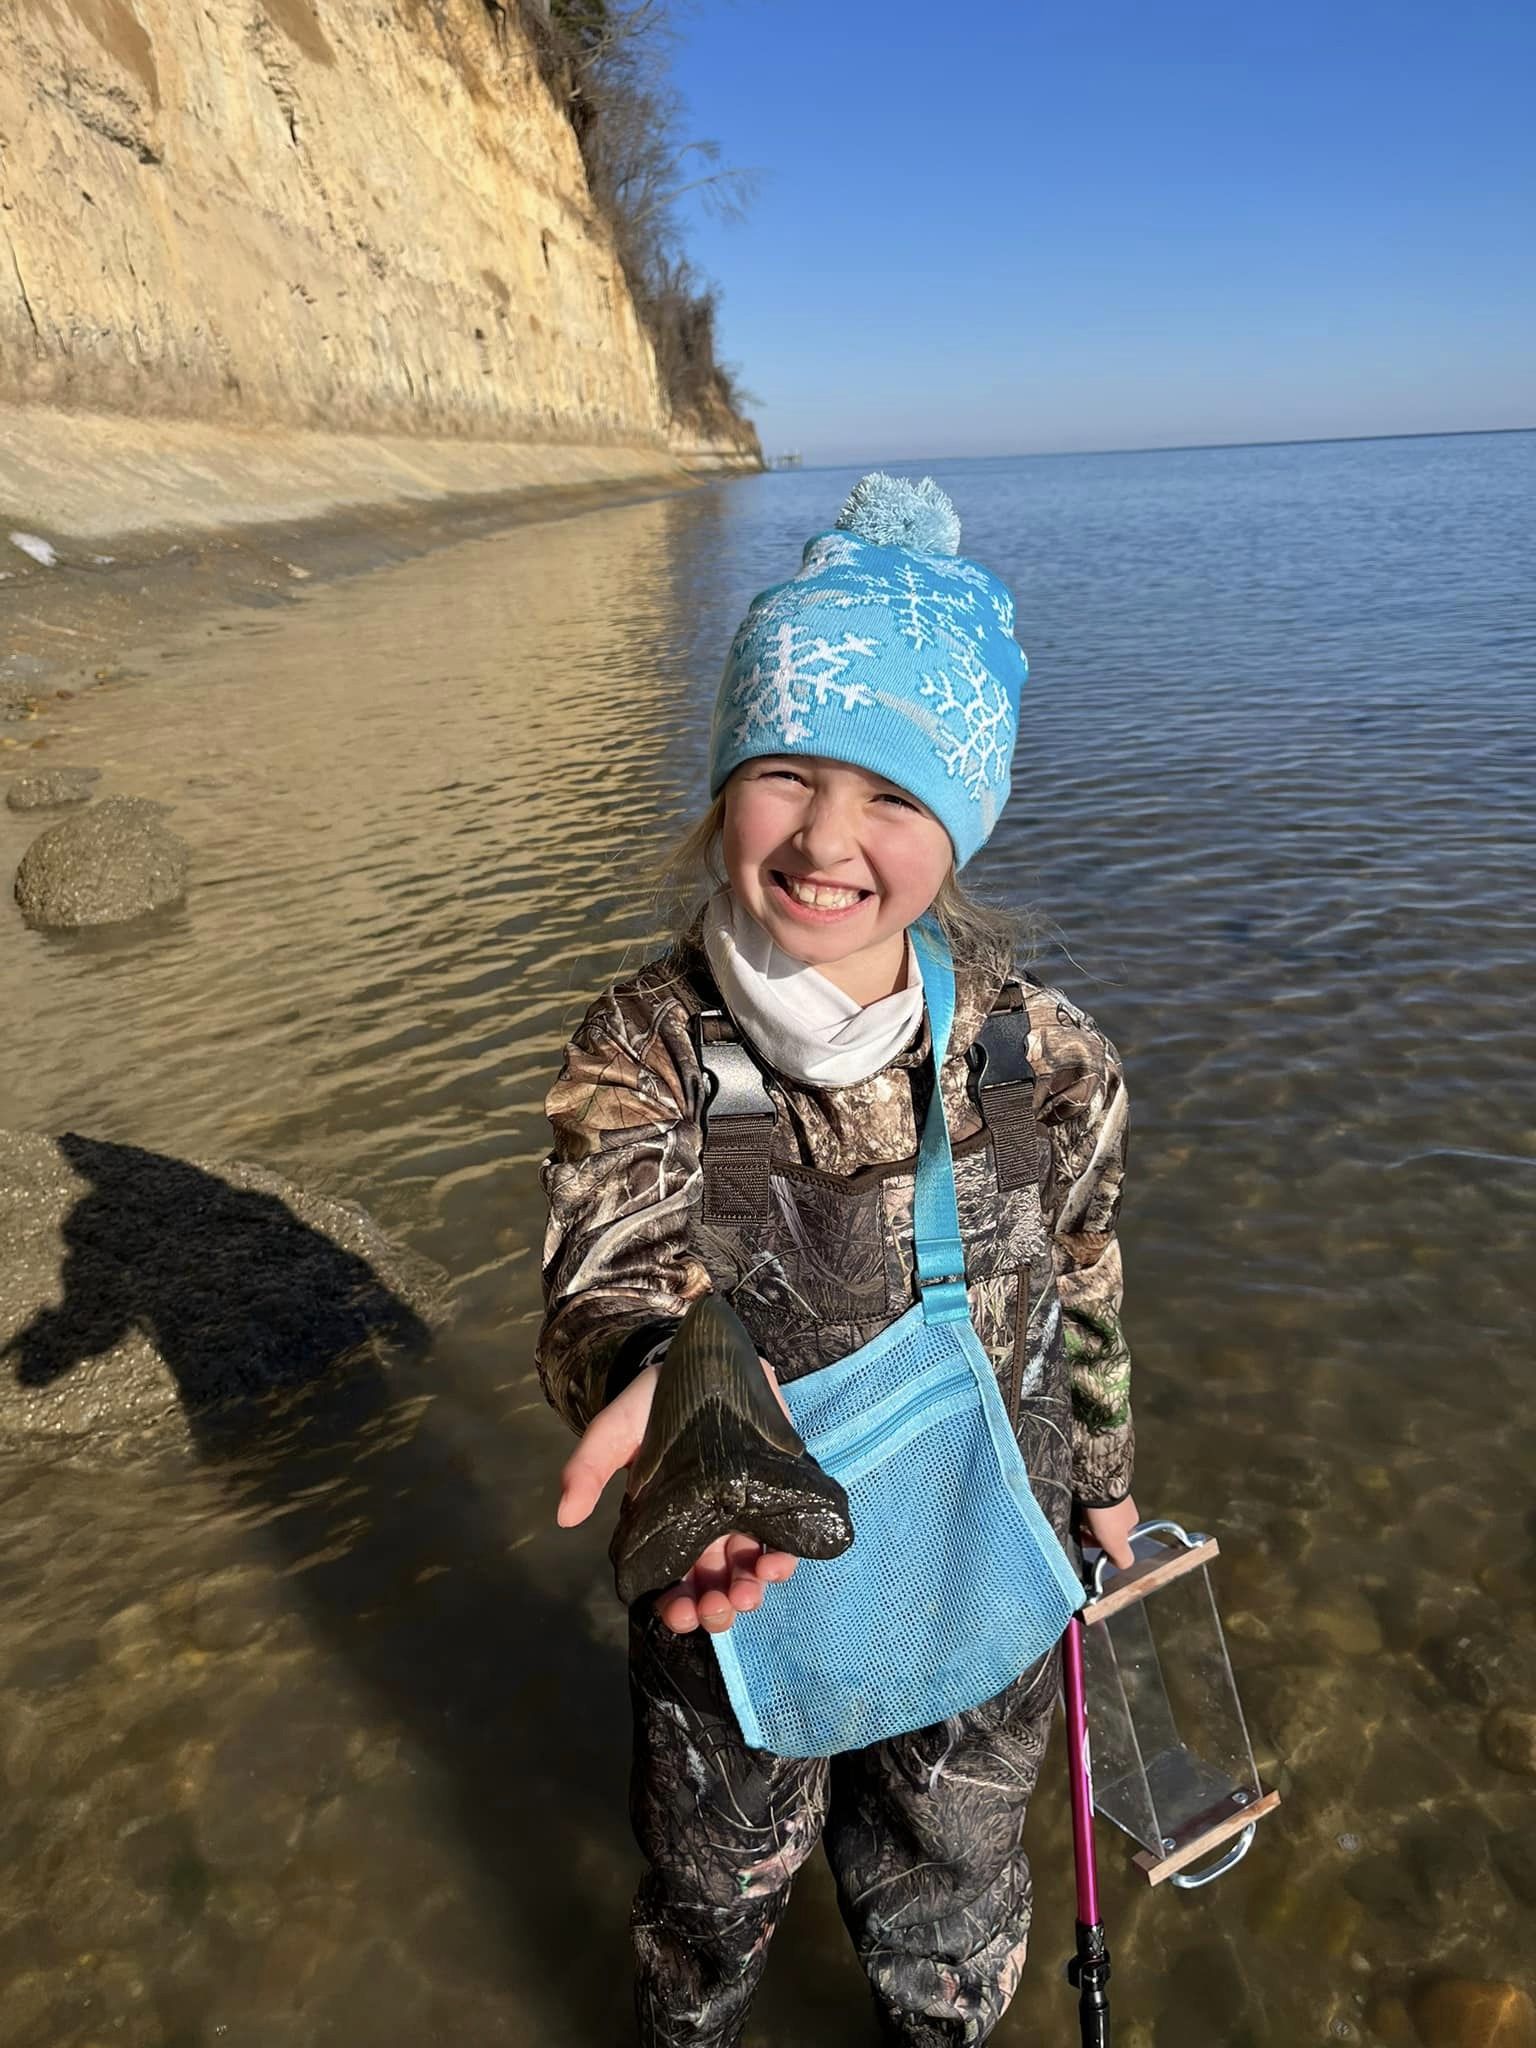 Nine-year-old spotted rare 15-million-year-old shark tooth 1